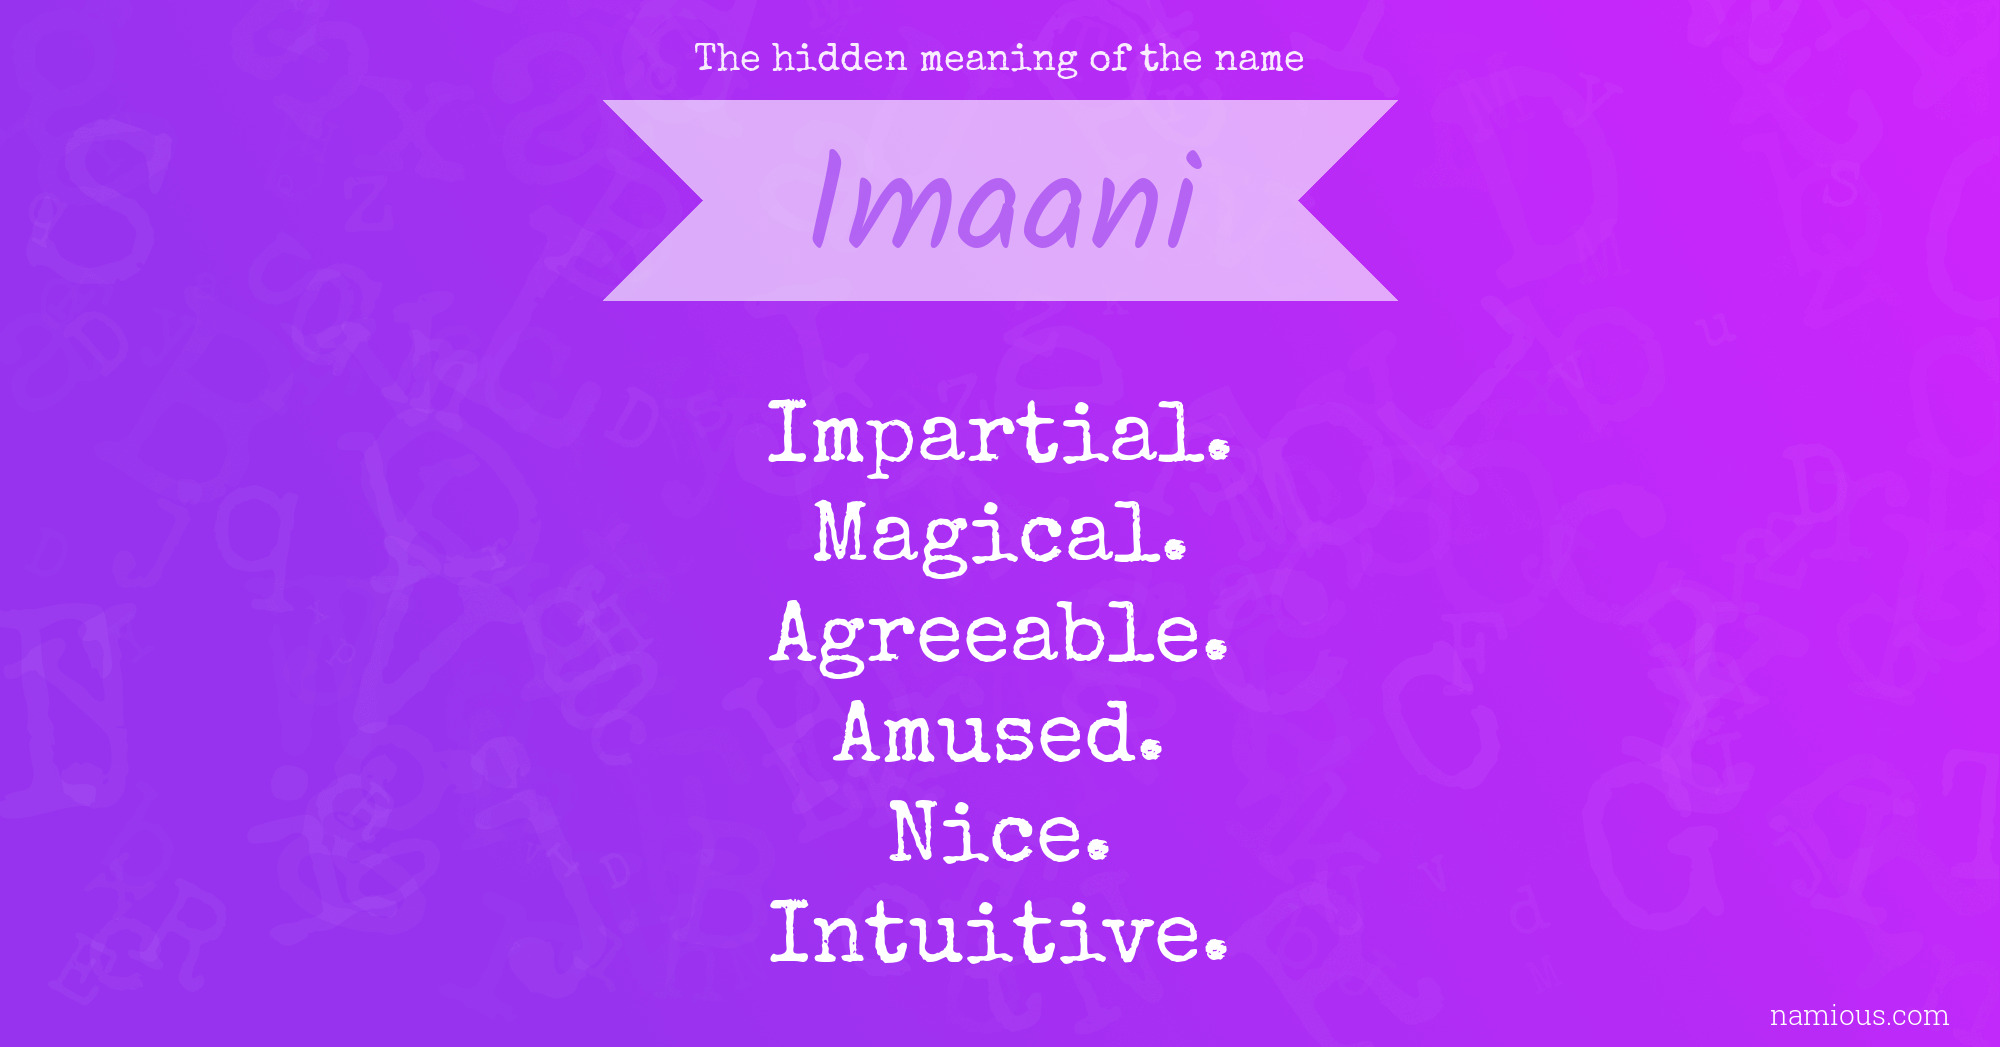 The hidden meaning of the name Imaani